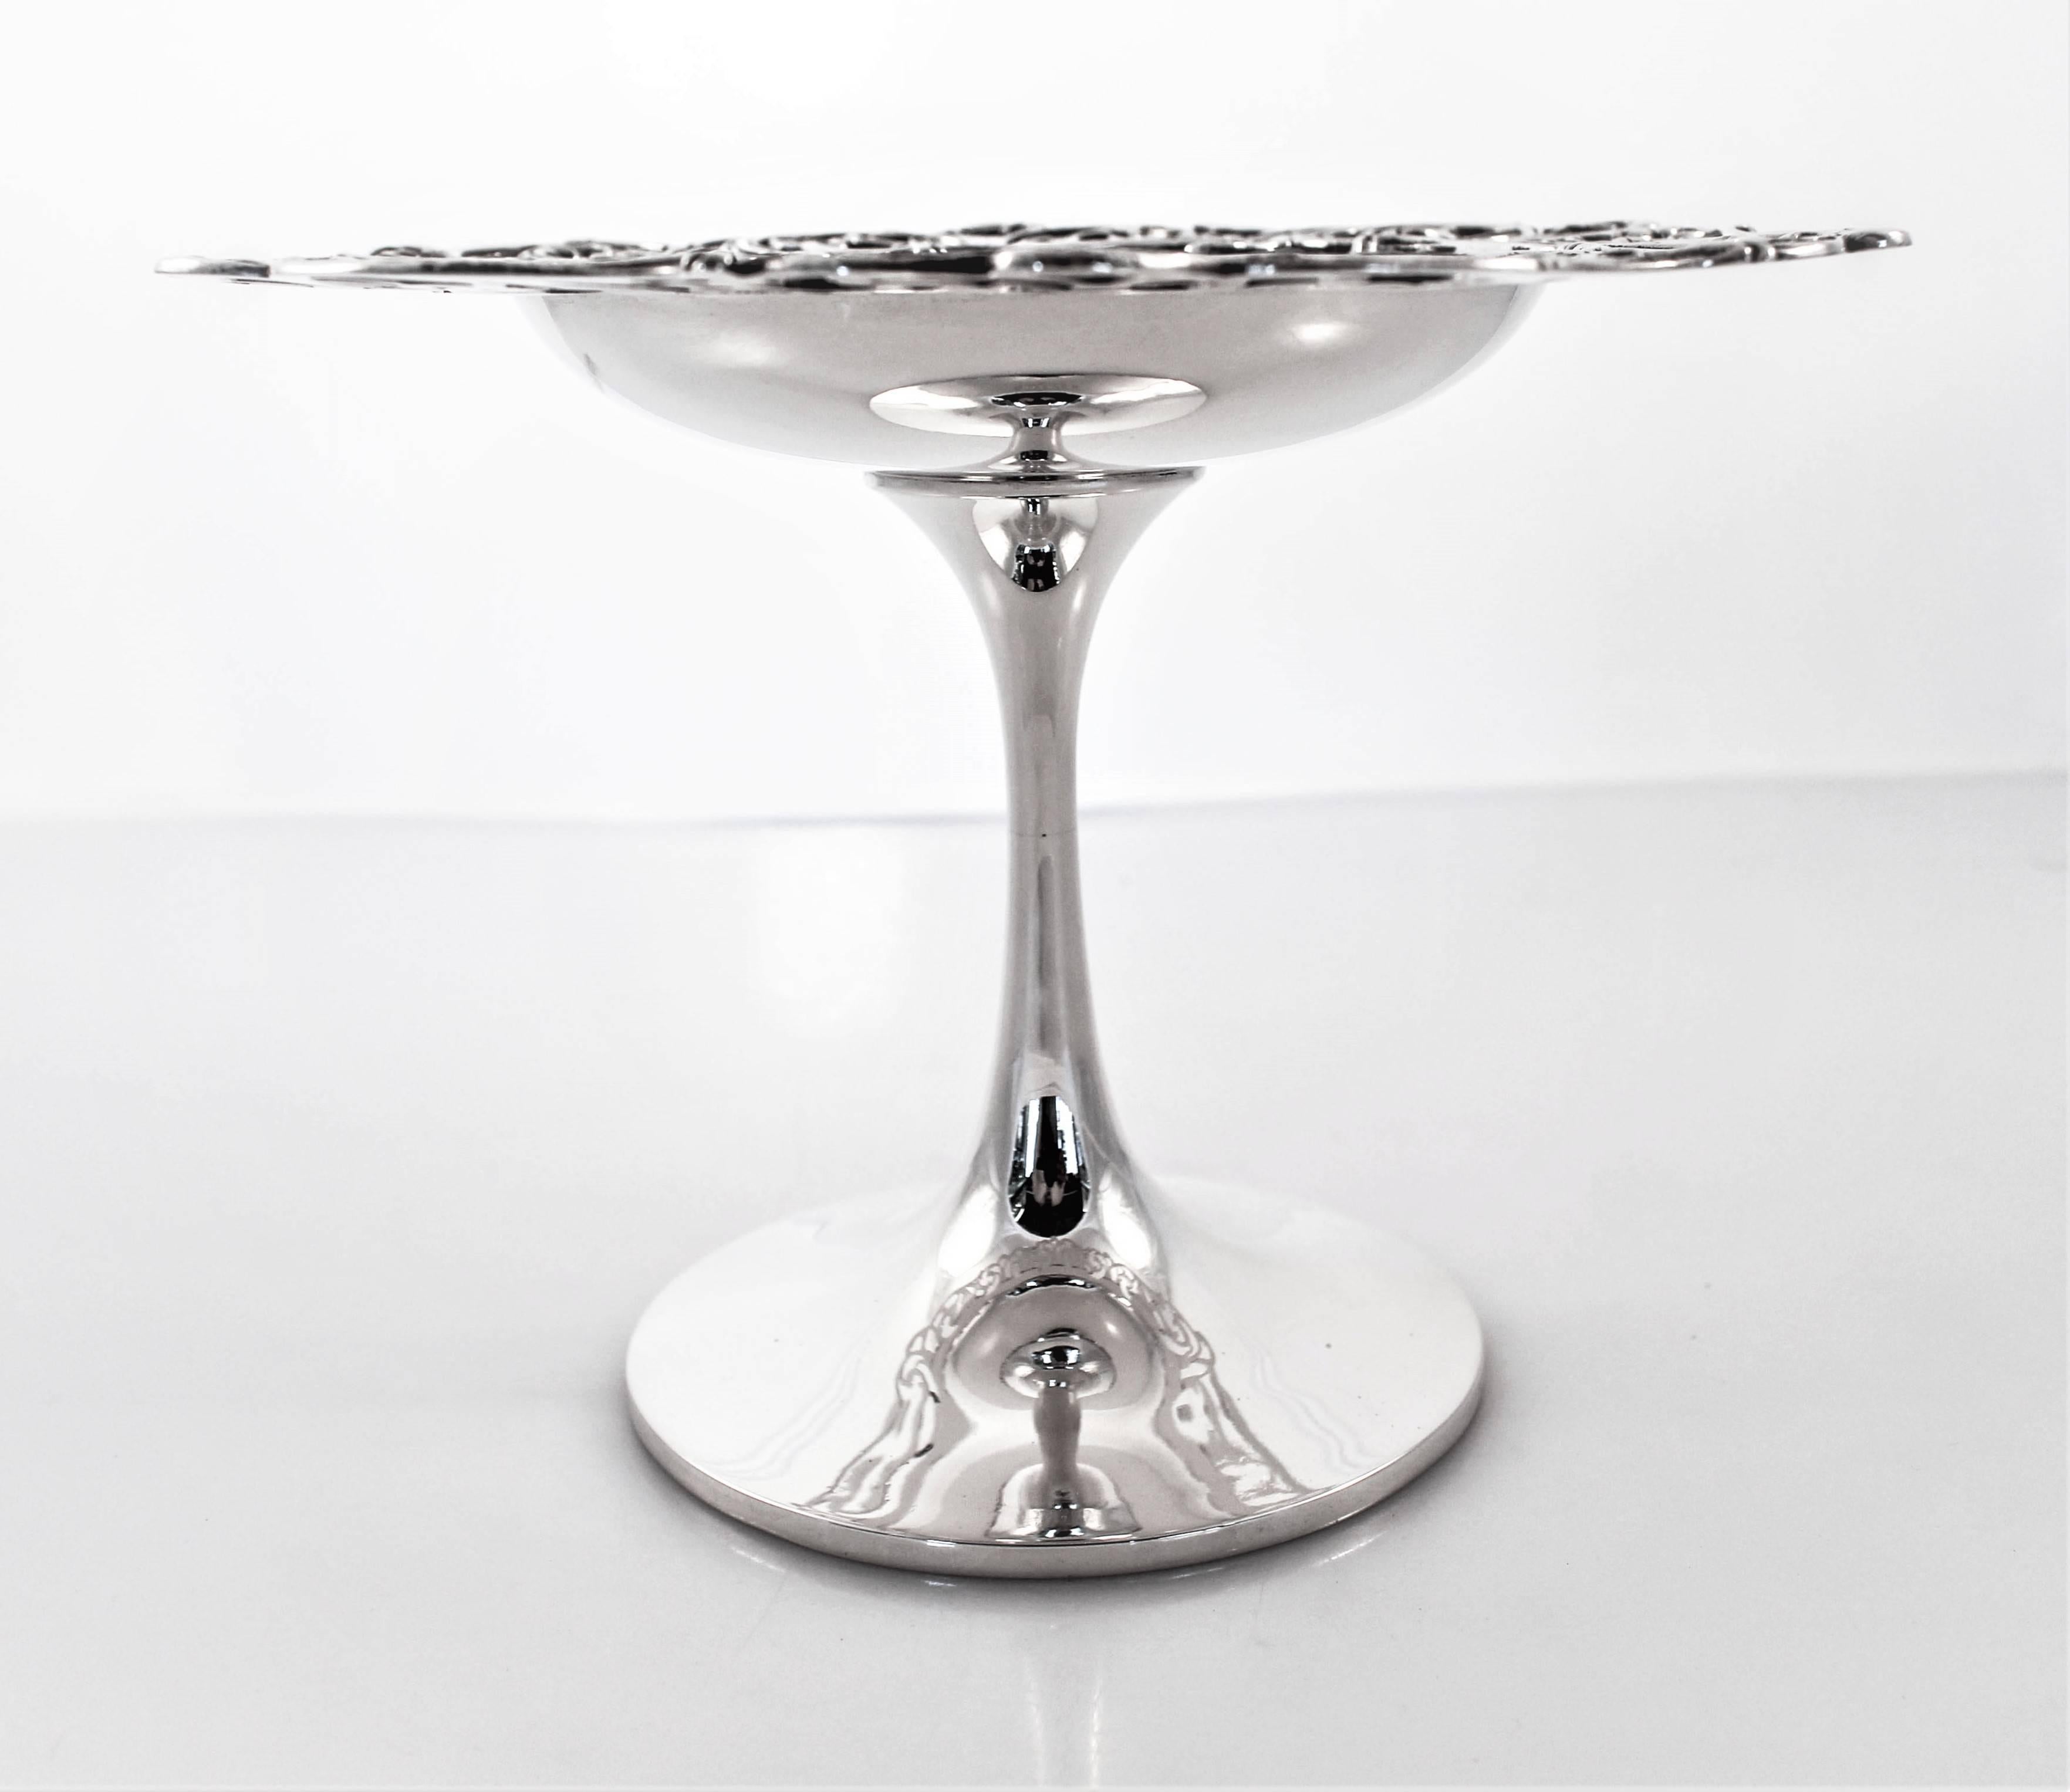 It’s where traditional meets modern; the best of both worlds. A two inch ornate openwork border encircles the top of this compote while the stem and base are modern and without design. A beautiful hand engraved monogram is in the center. This piece